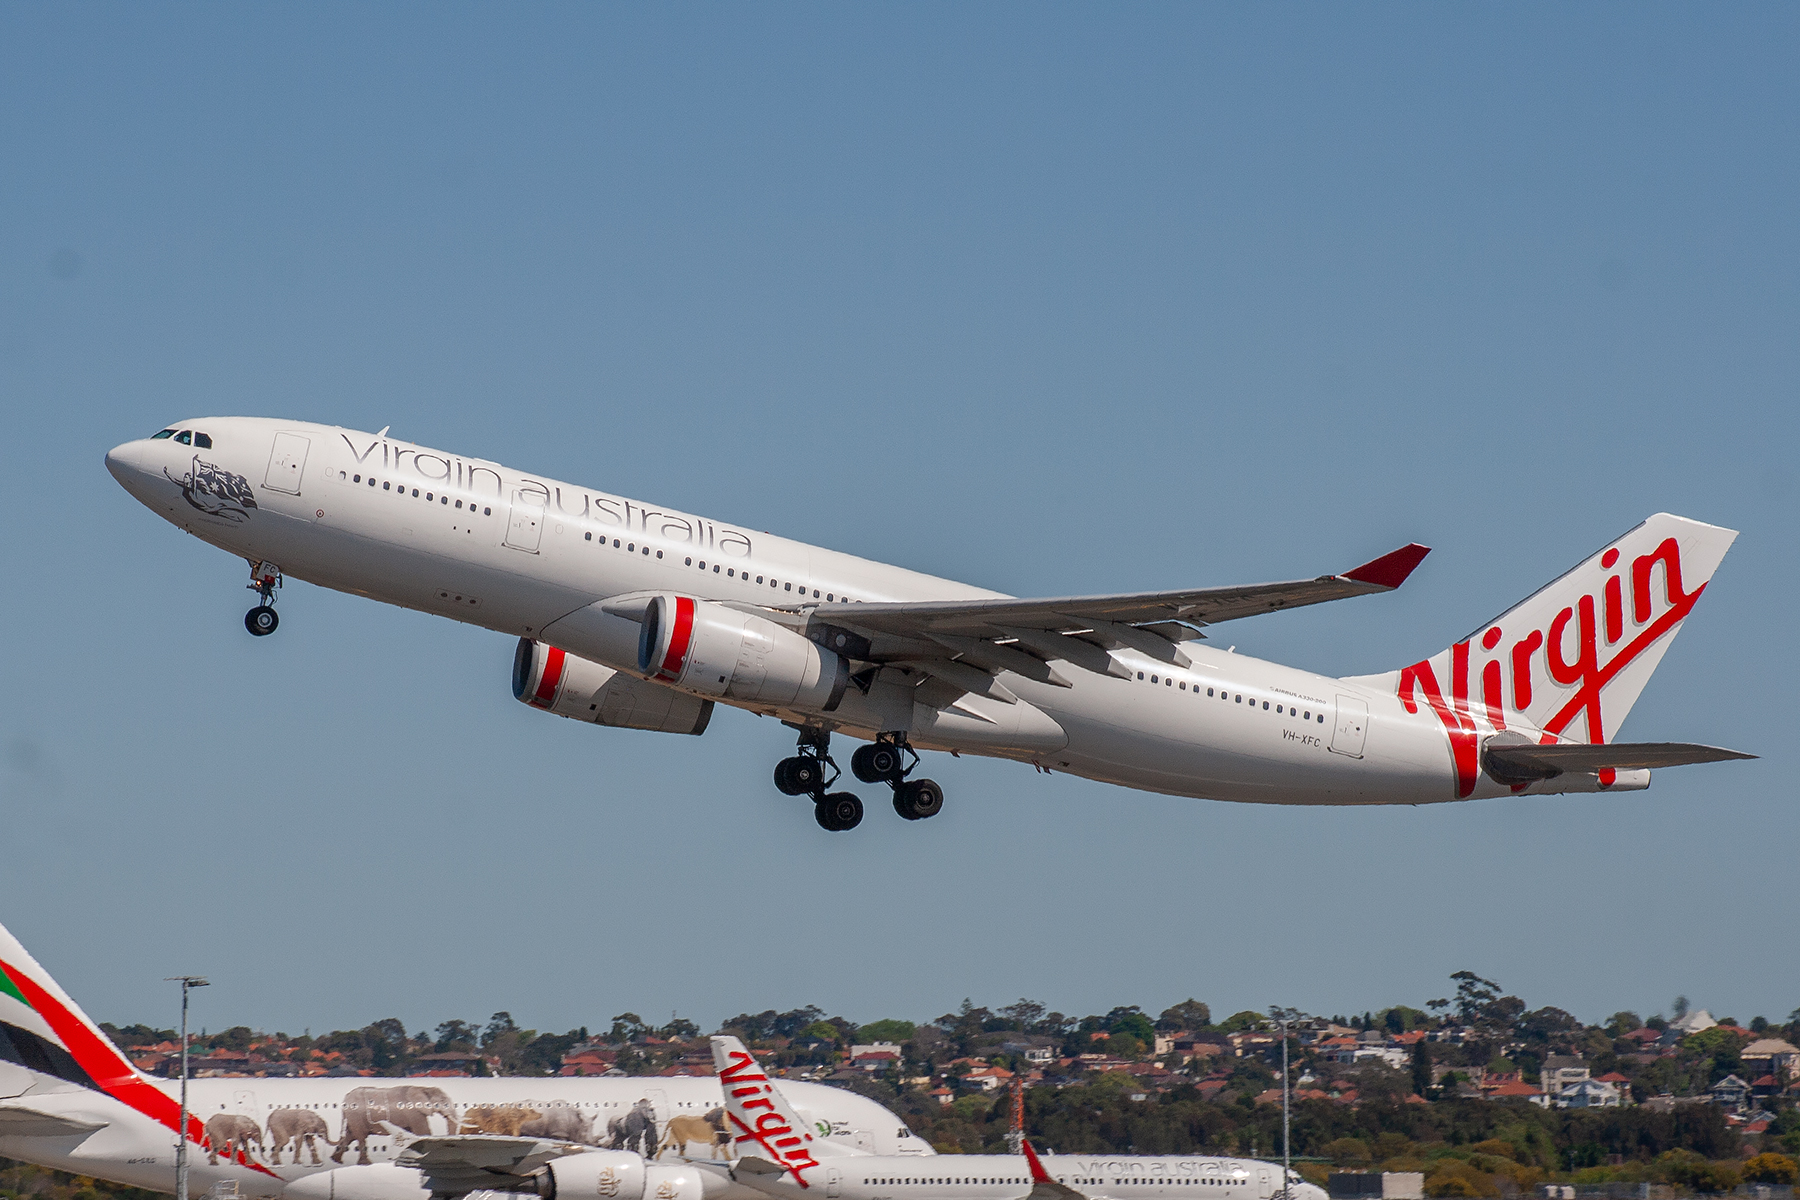 Virgin Australia Airlines Airbus A330-200 VH-XFC at Kingsford Smith